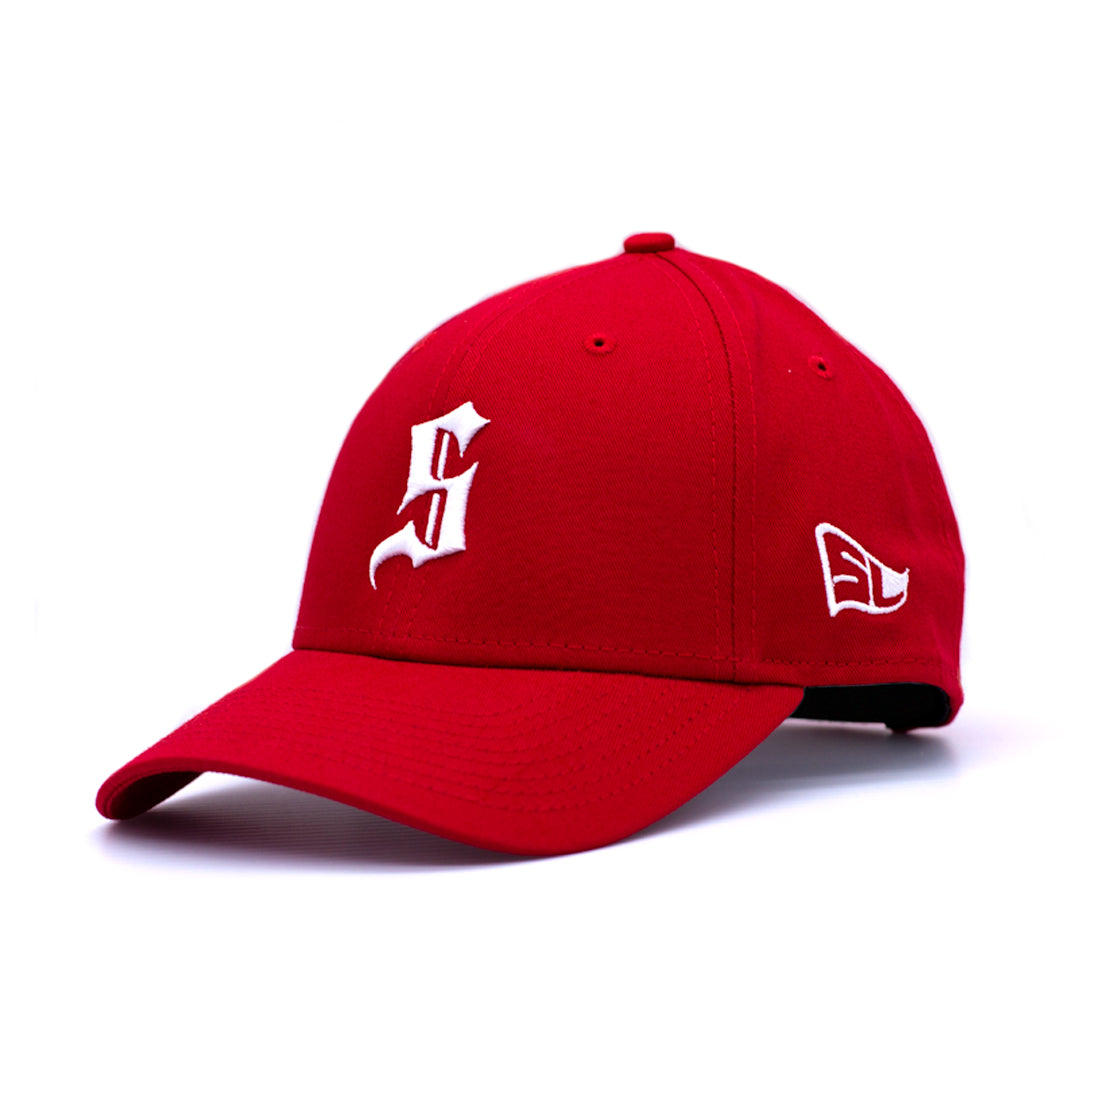 S Life Structured Cap in red